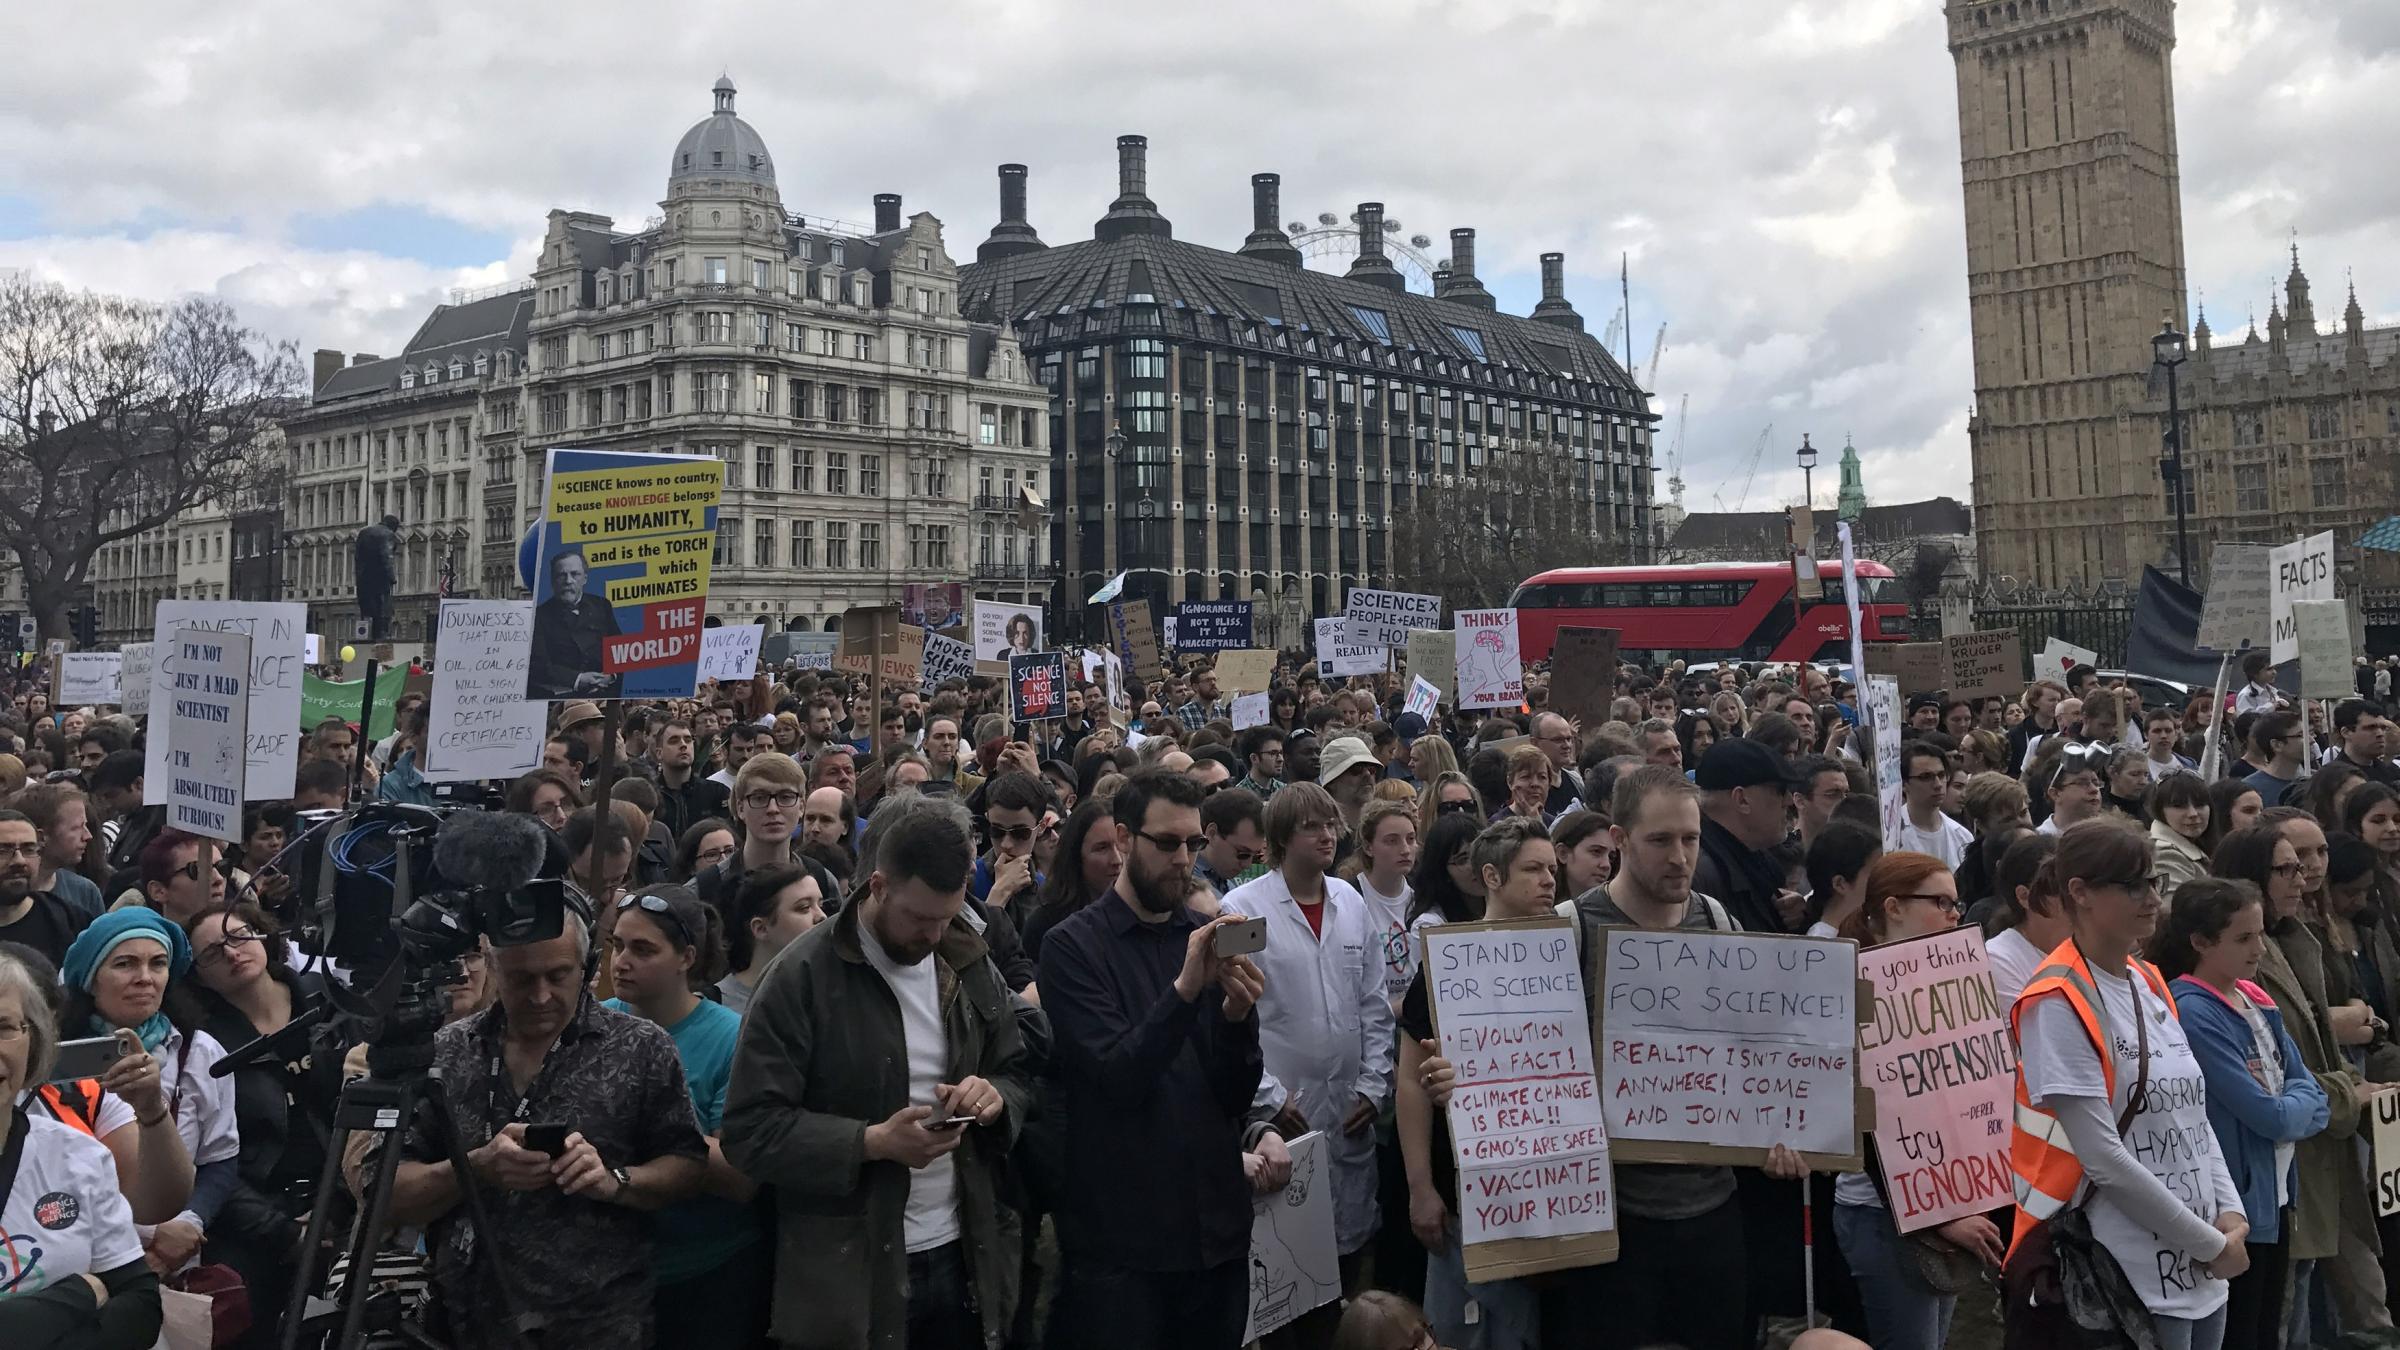 Thousands join scientists' protest against Brexit and 'post-truth age' - Ealing Times